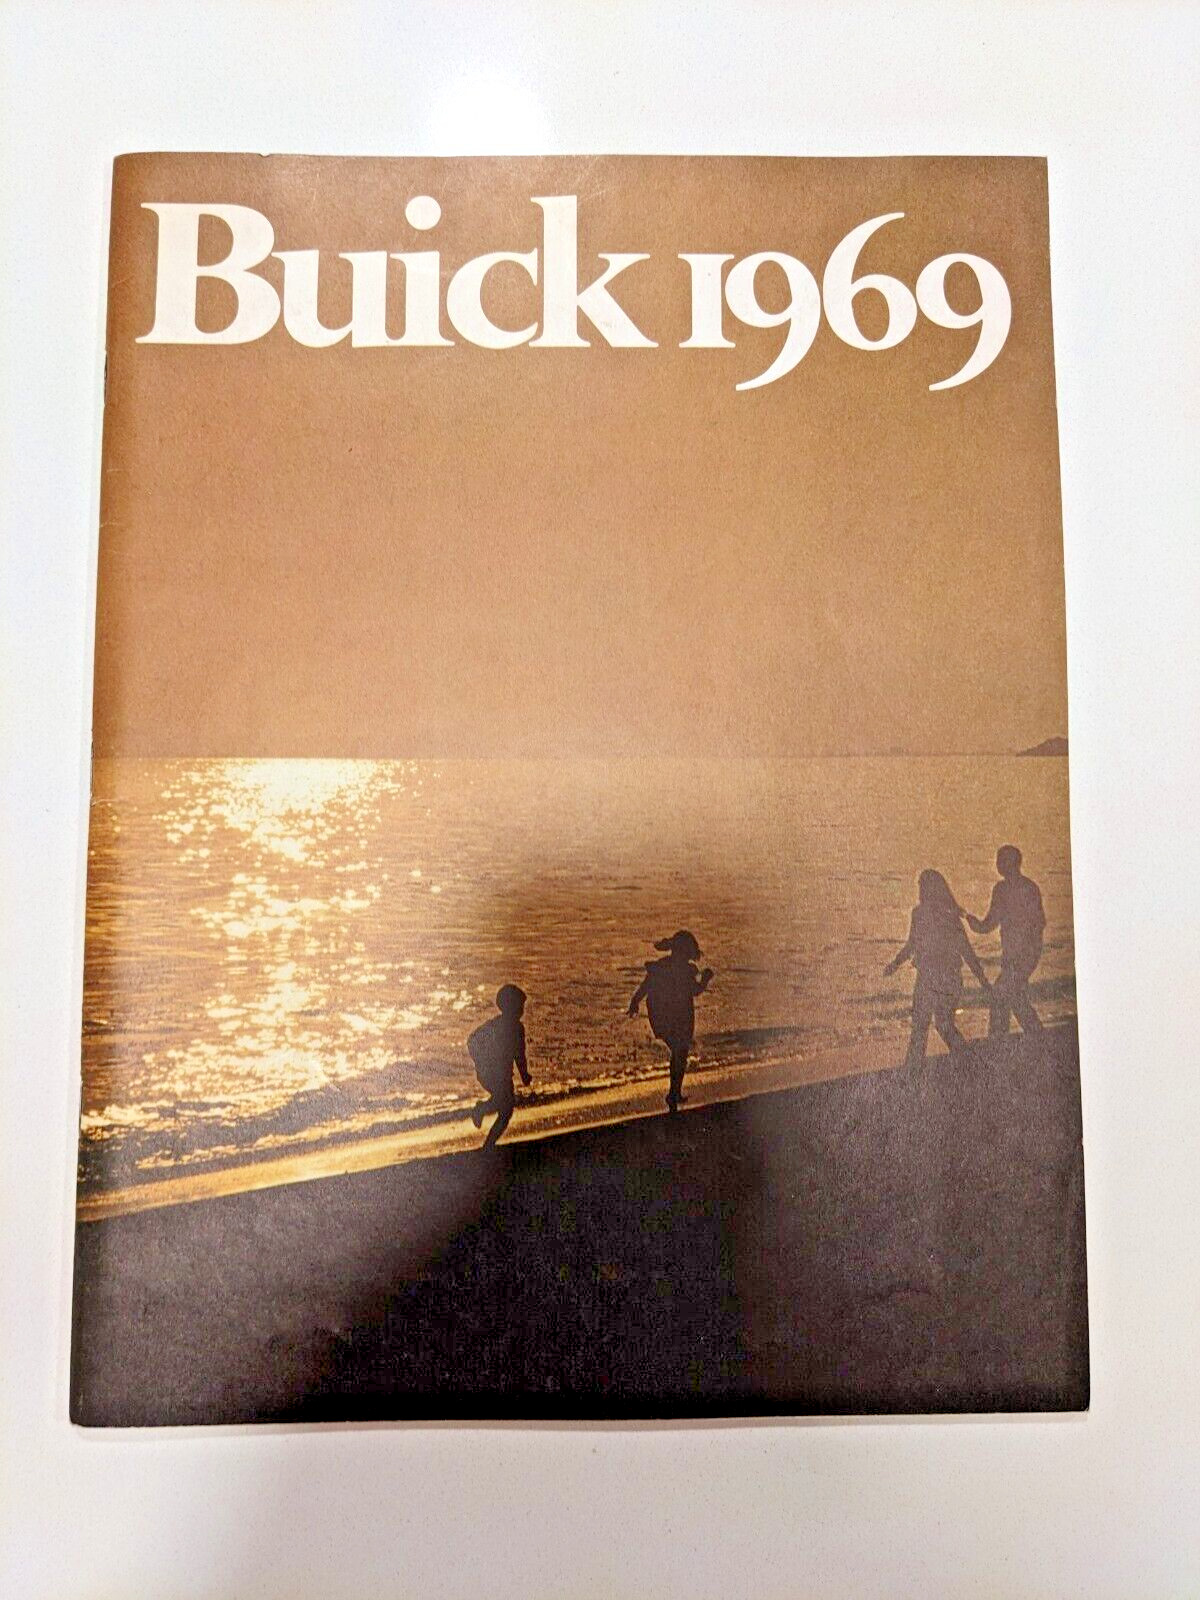 1969 Buick All Models New Car Sales Brochure New Stock NOS - LARGE Format